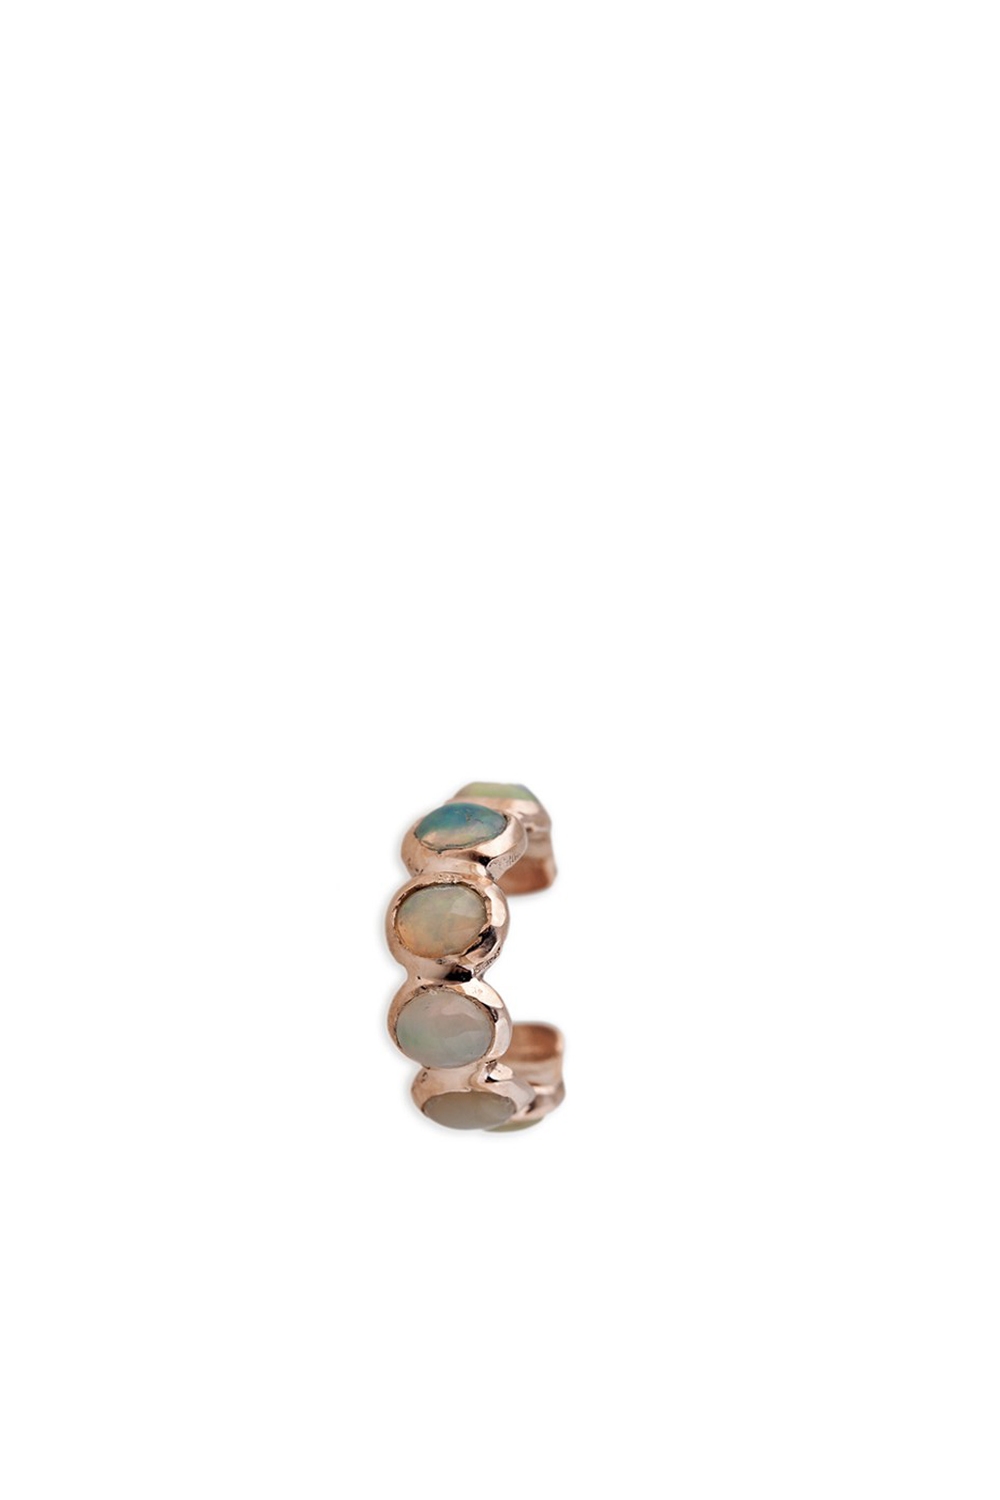 OPAL AND ROSE GOLD JEWELRY